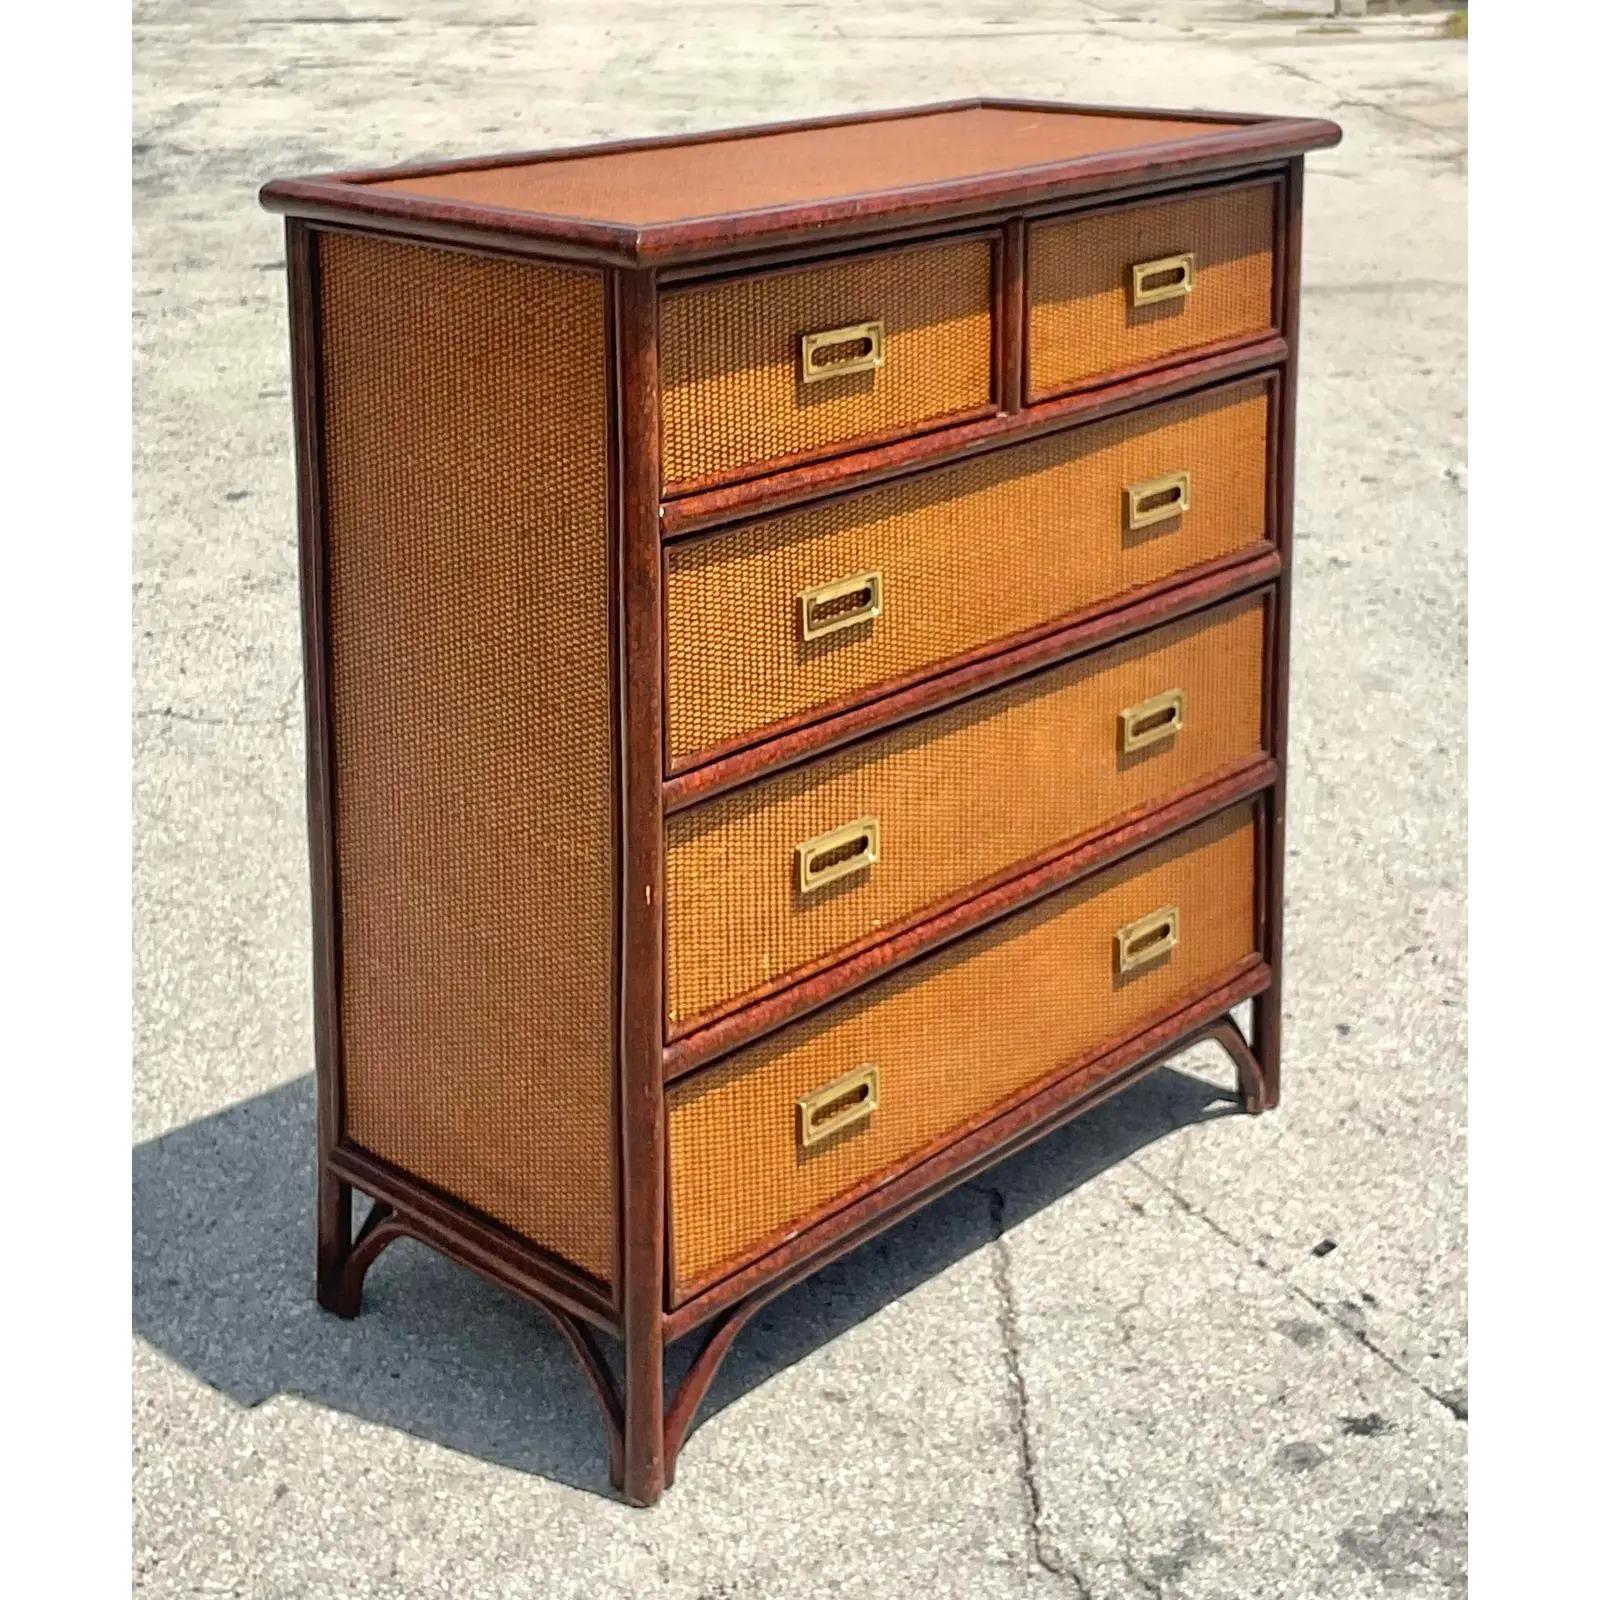 Fabulous vintage Coastal chest of drawers. A gorgeous tortoise shell finish on the frame with inset woven rattan panels. Acquired from a Palm Beach estate.